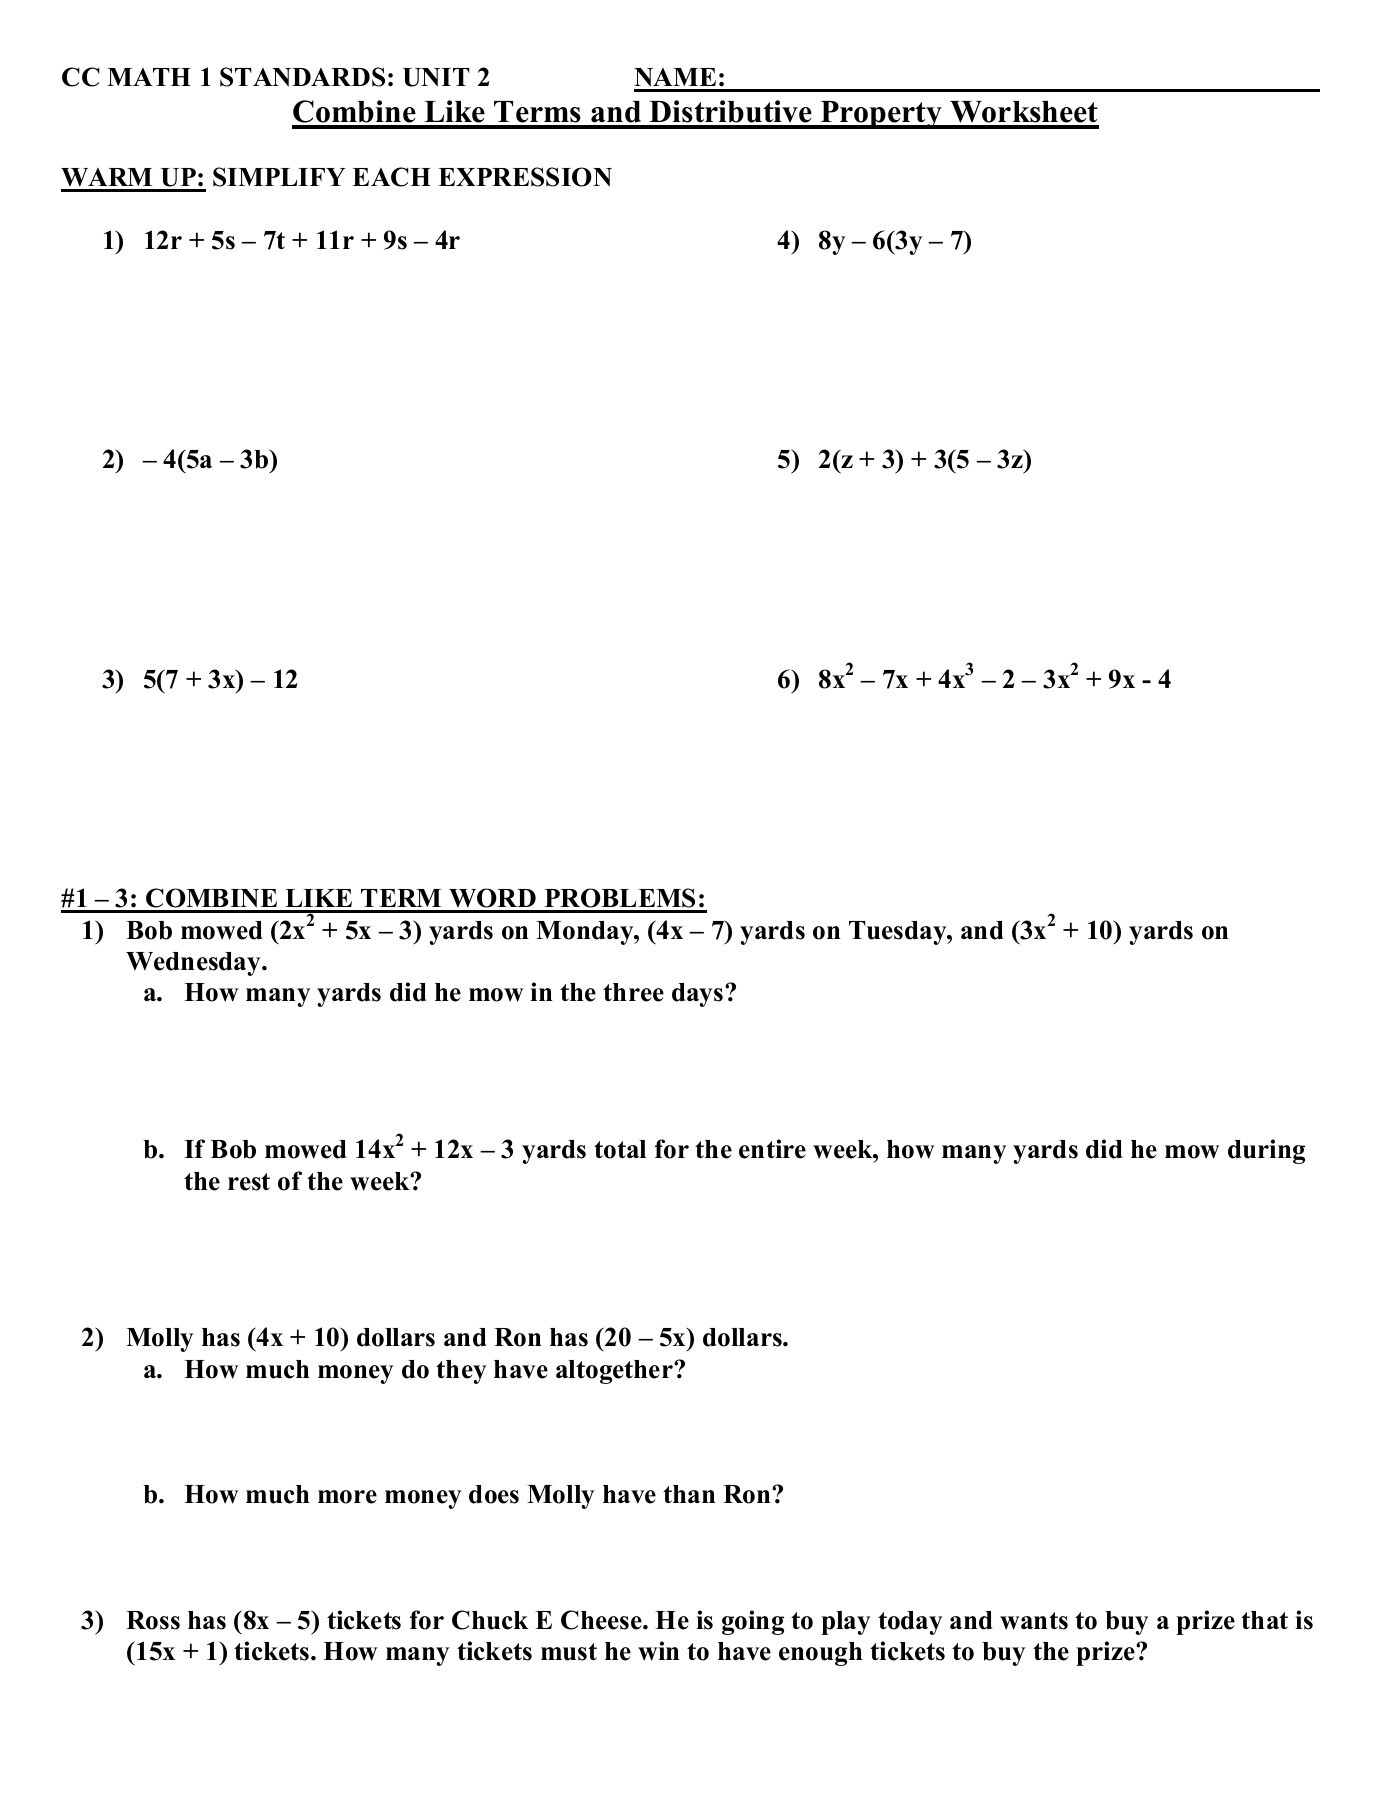 Distributive Property Equations Worksheet Cc Math 1 Standards Unit 2 Name Bine Like Terms and